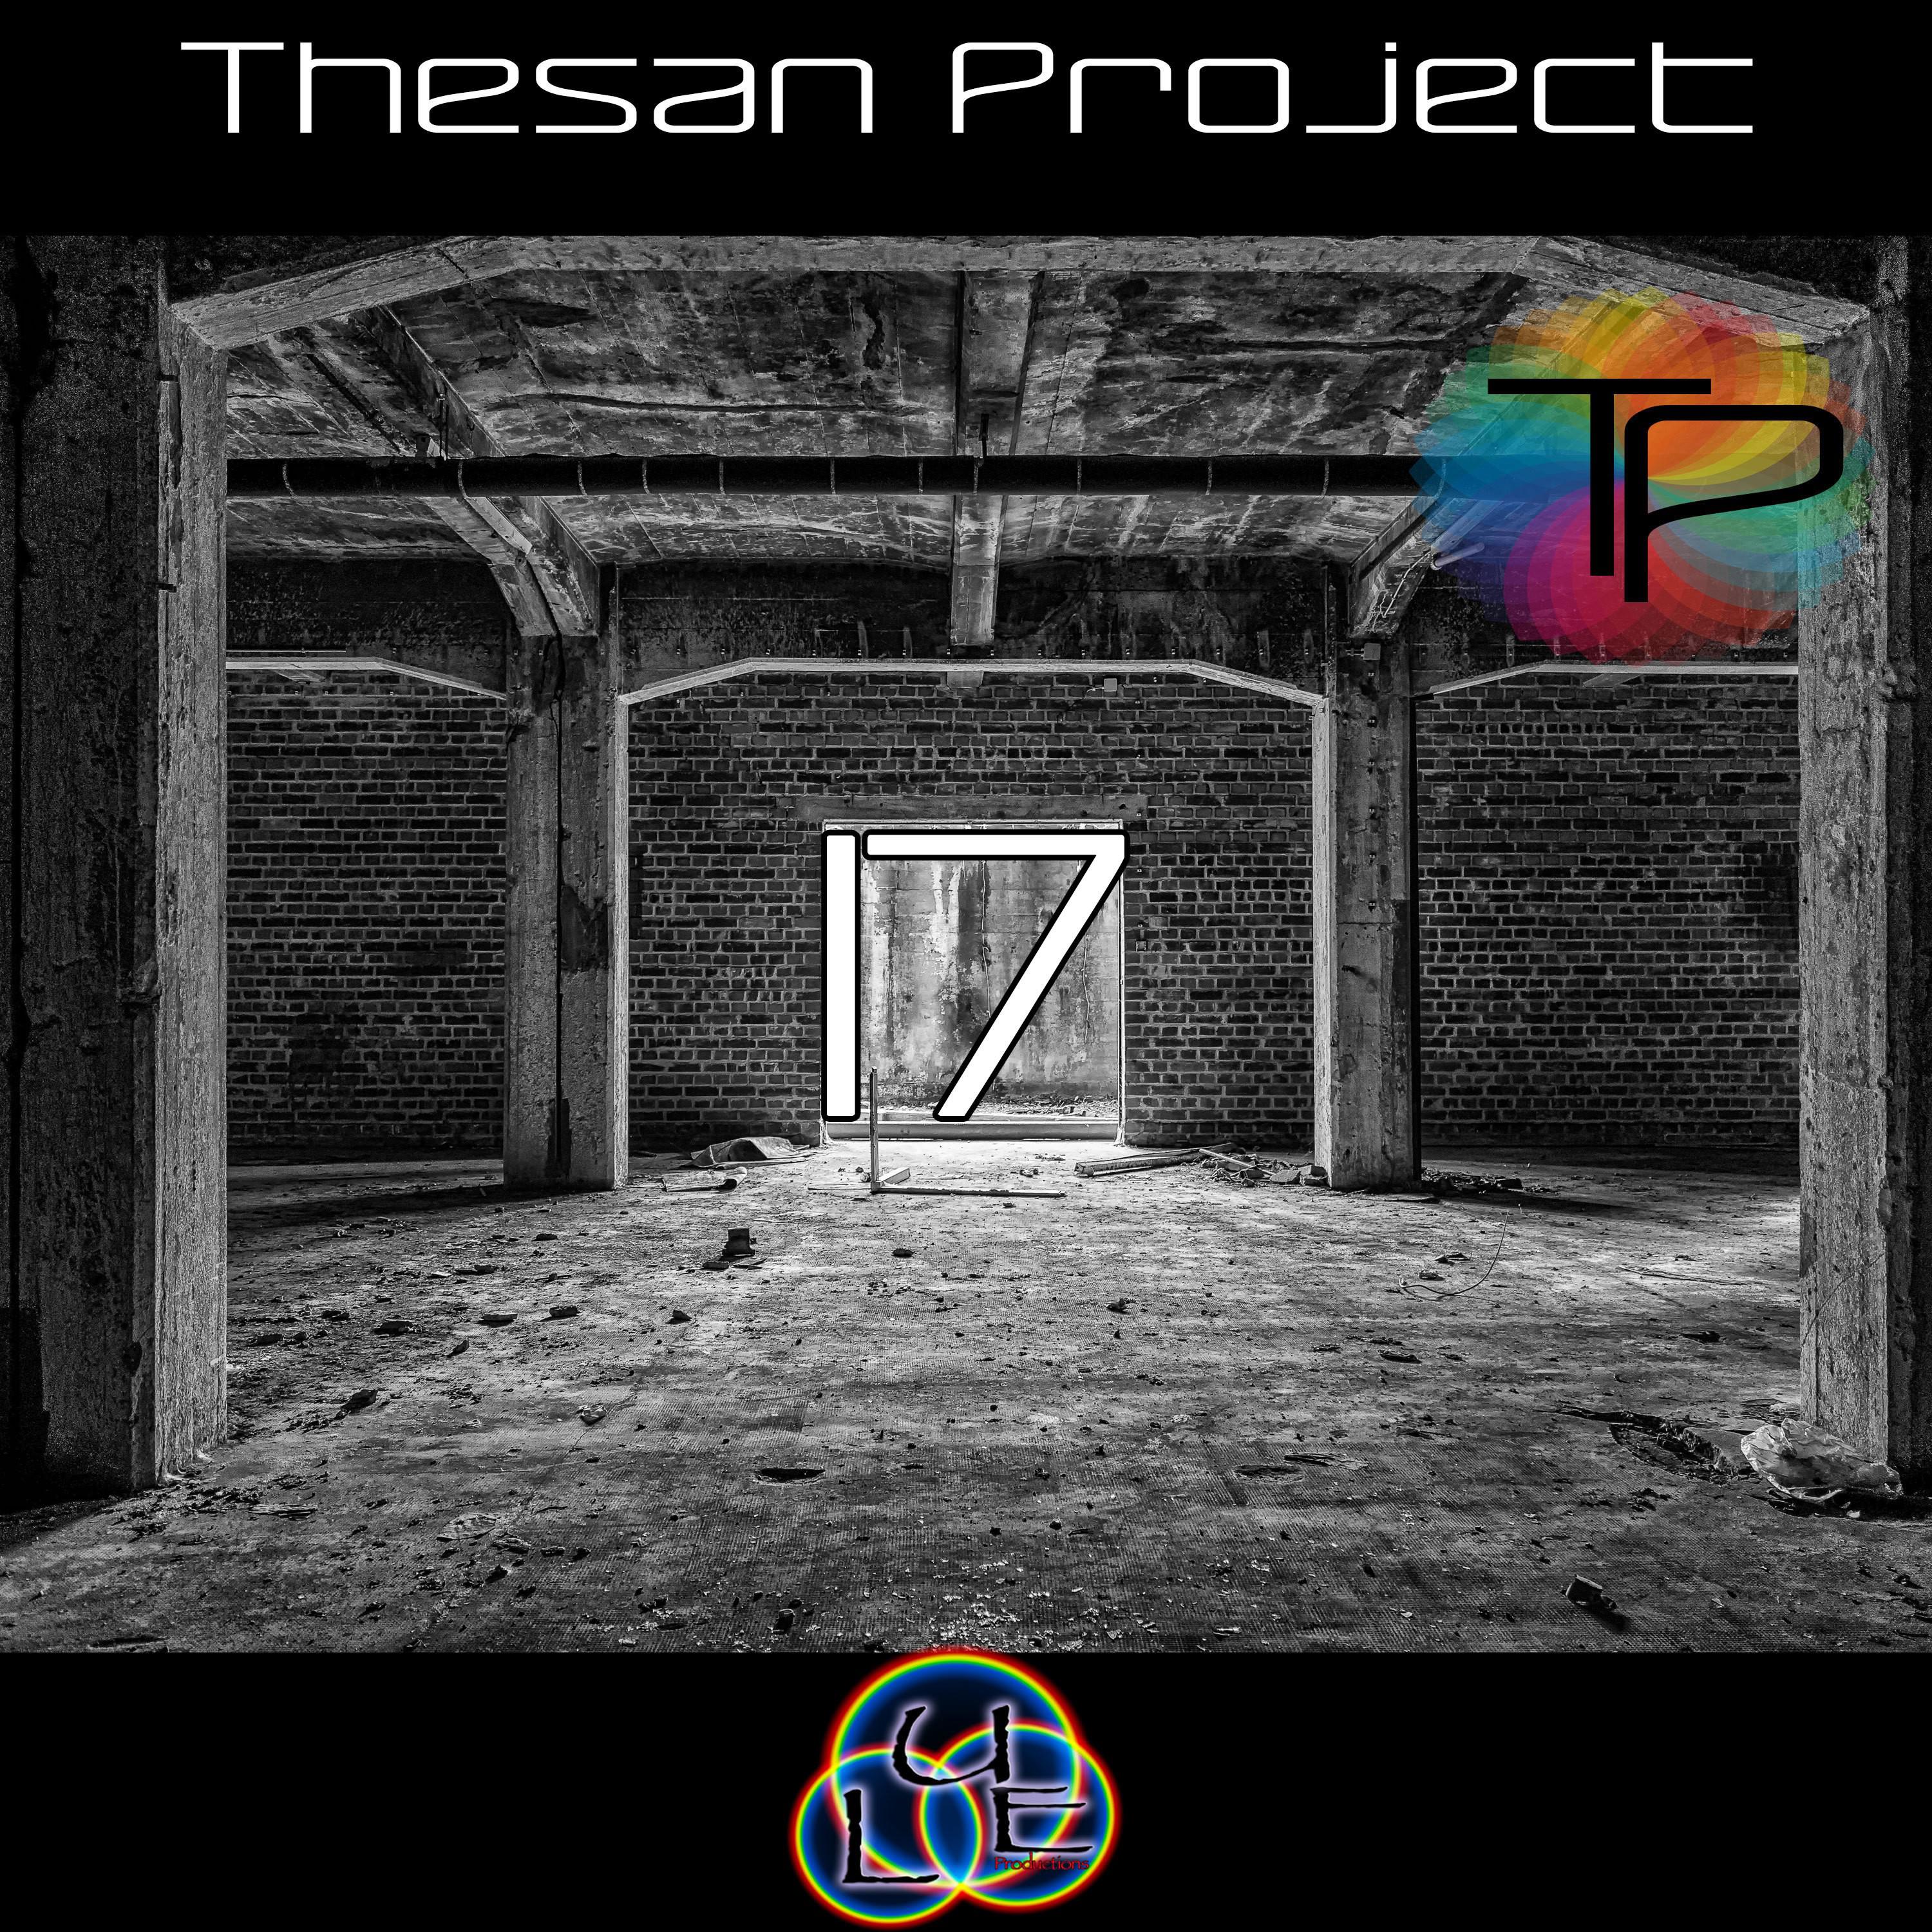 Thesan Project - My Life